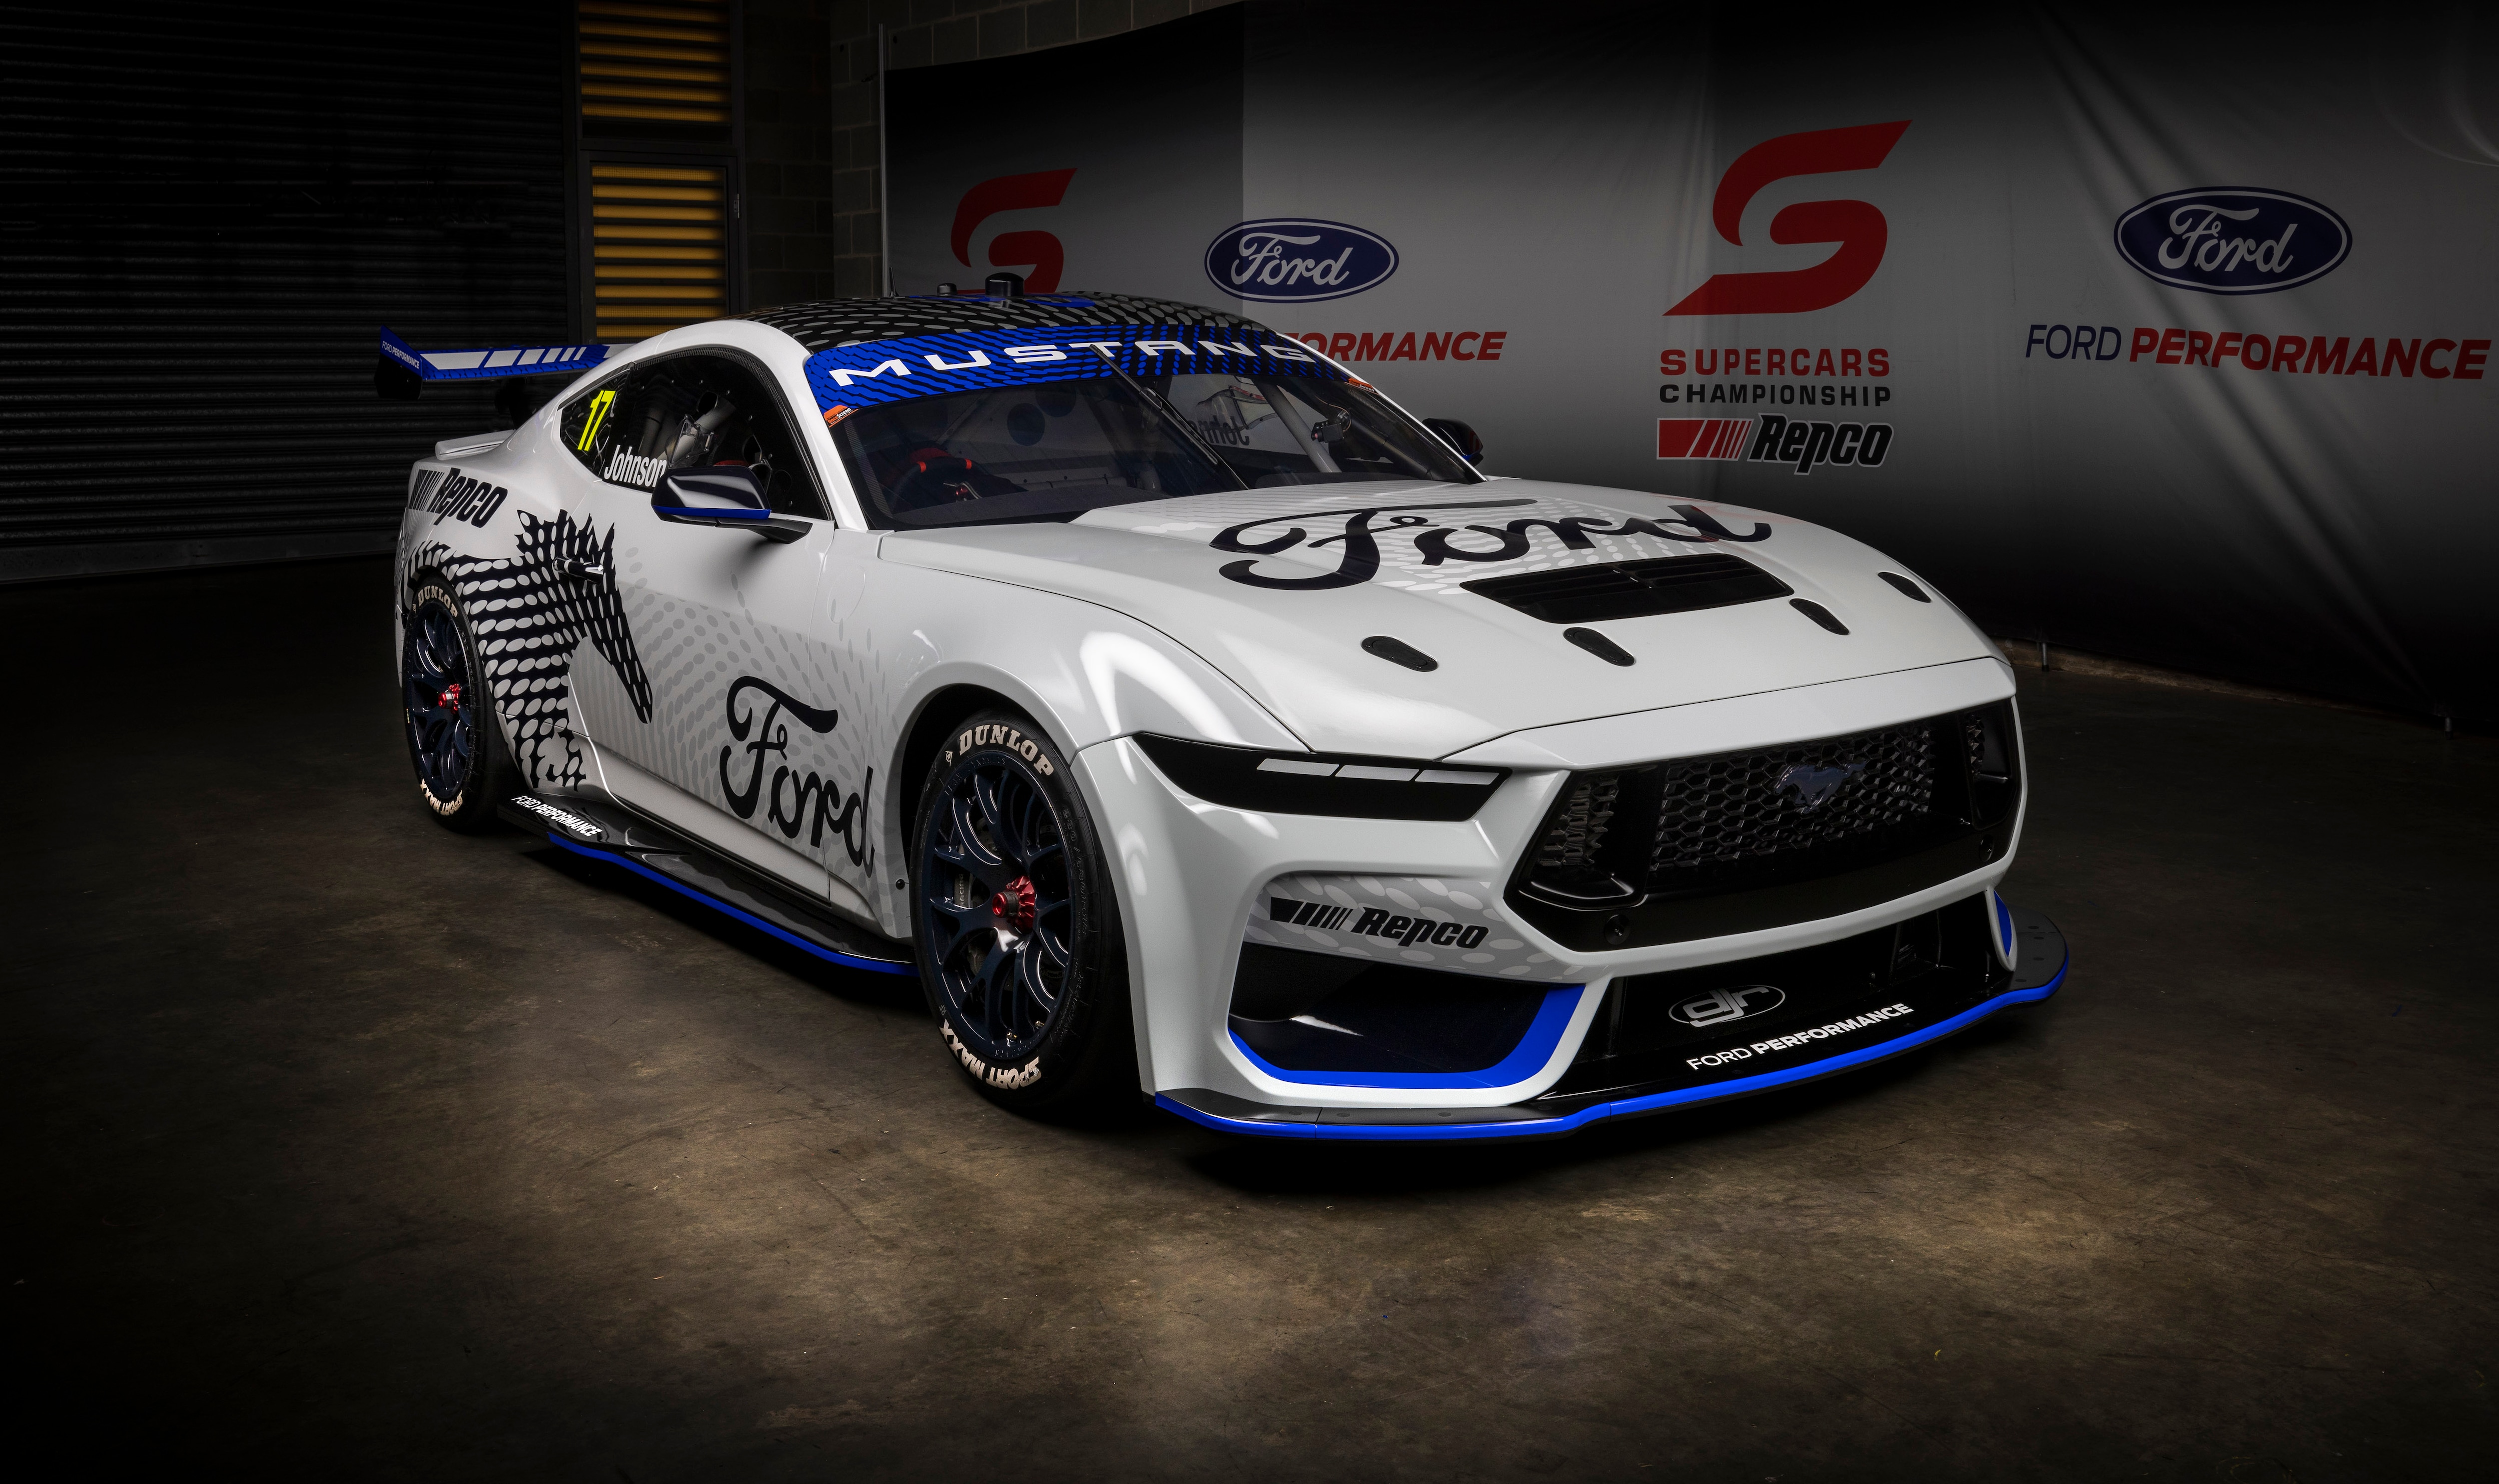 GLOBAL FIRST: All-New Ford Mustang GT Supercars Race Car Revealed at  Bathurst 1000